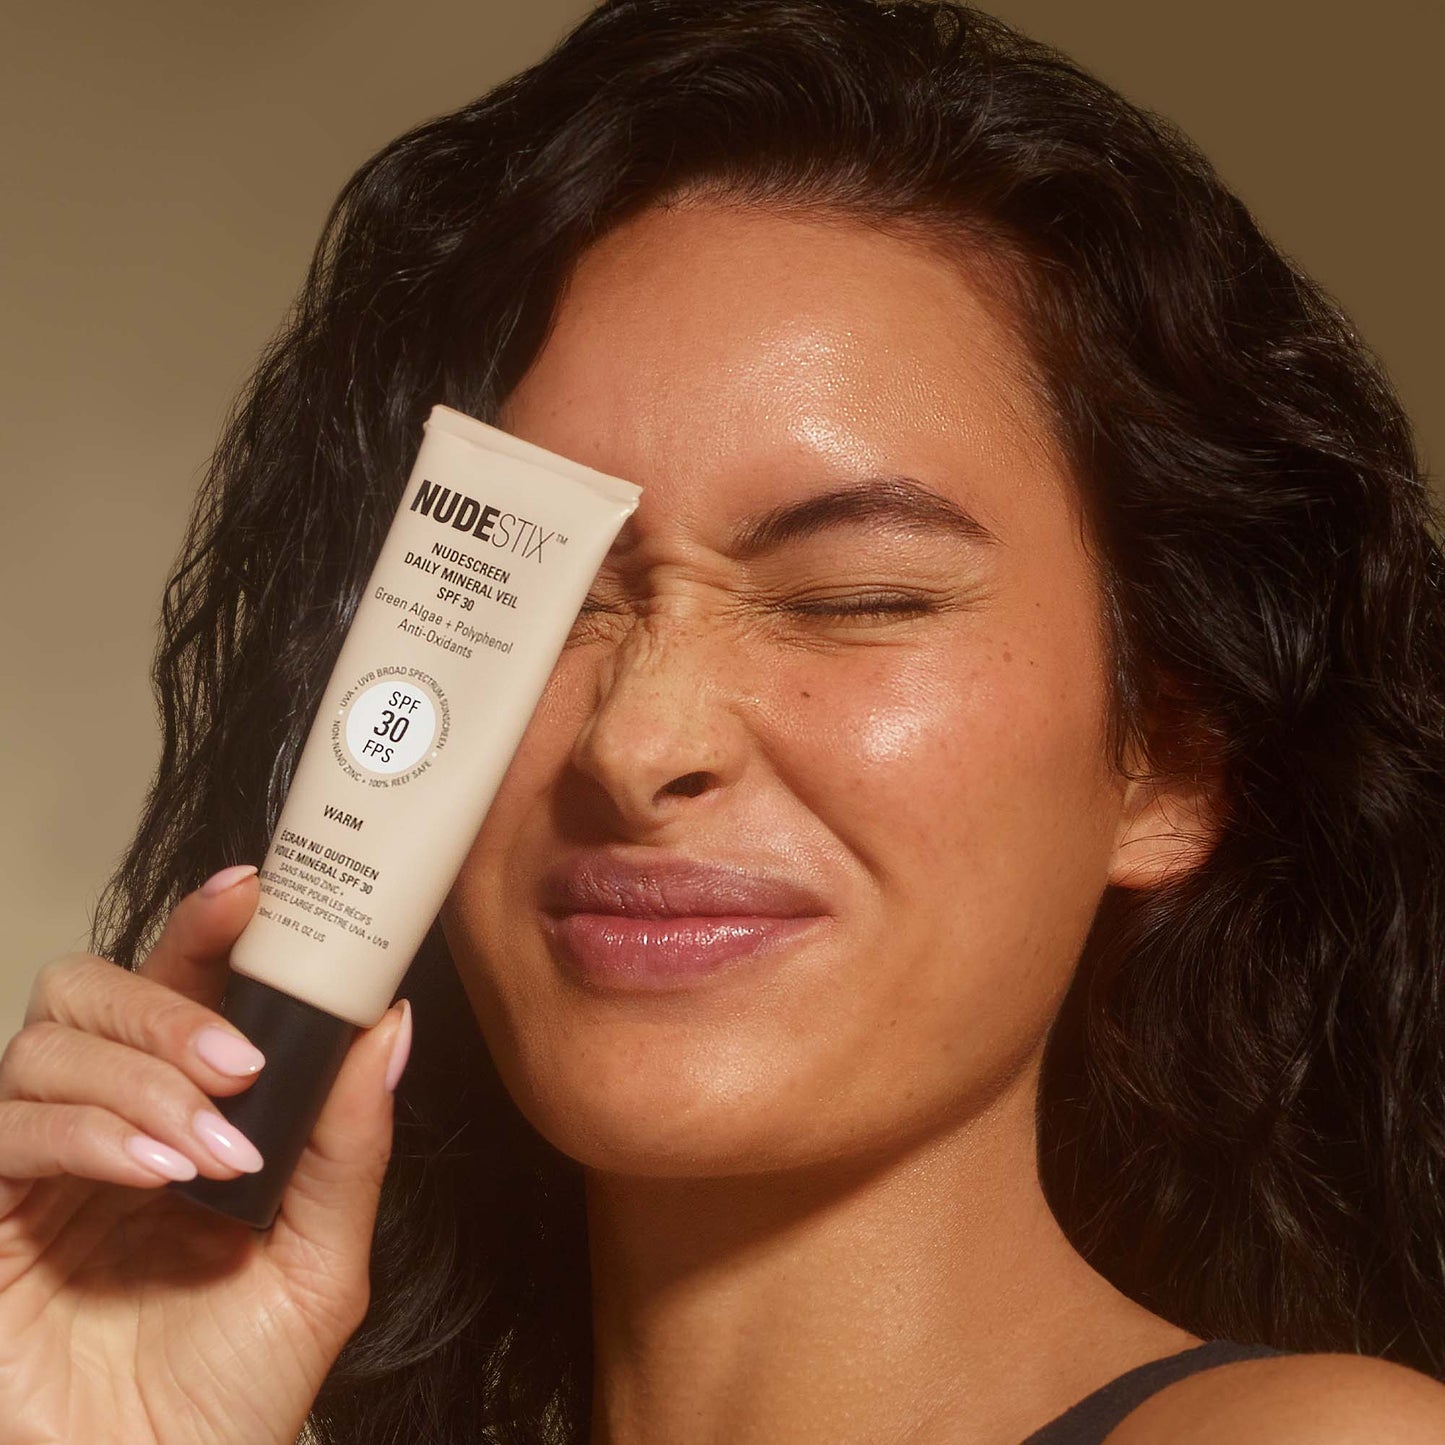 Young woman holding a tube of Nudescreen SPF Moisturizer in shade Warm